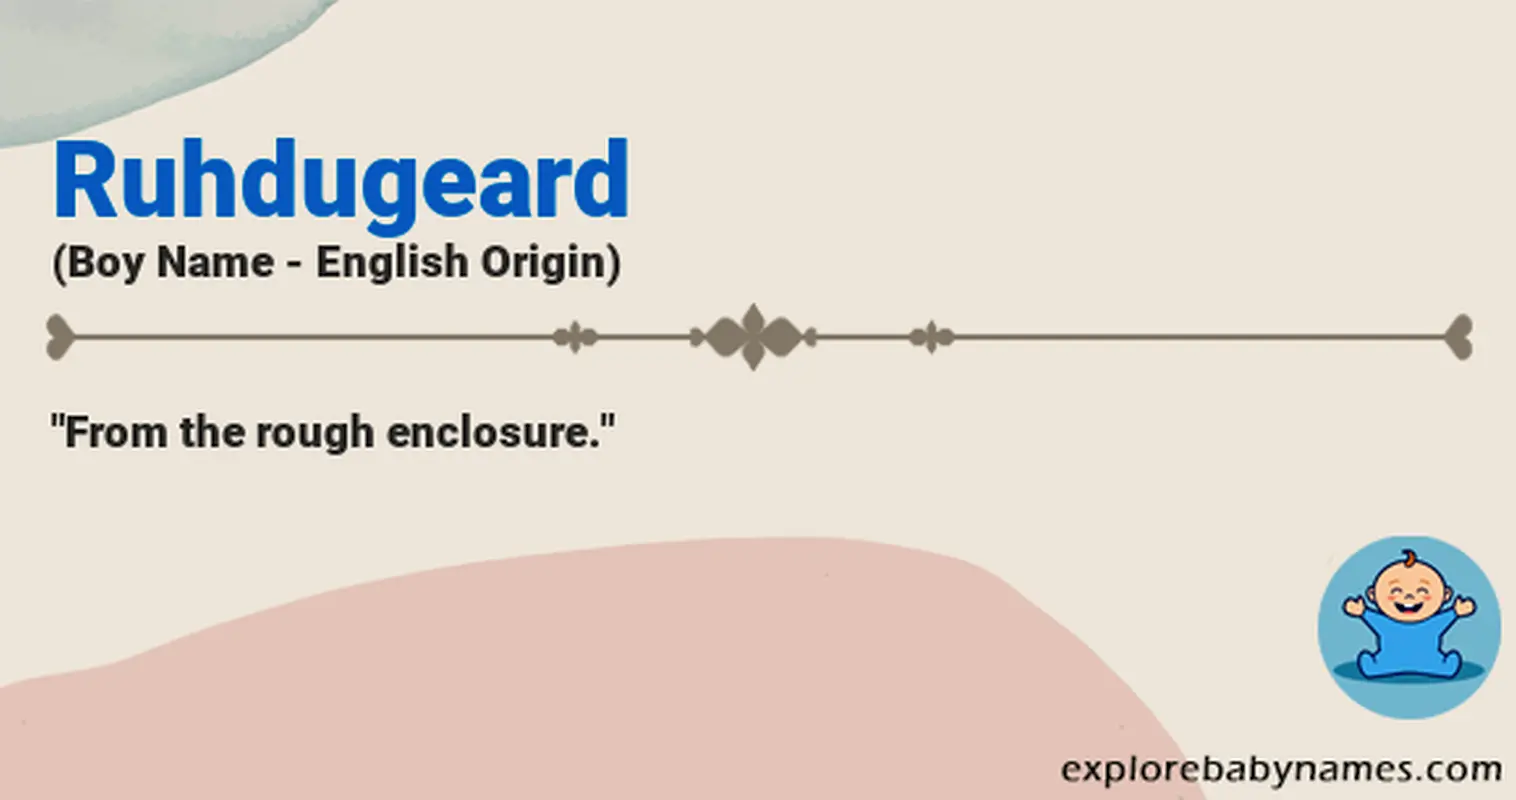 Meaning of Ruhdugeard